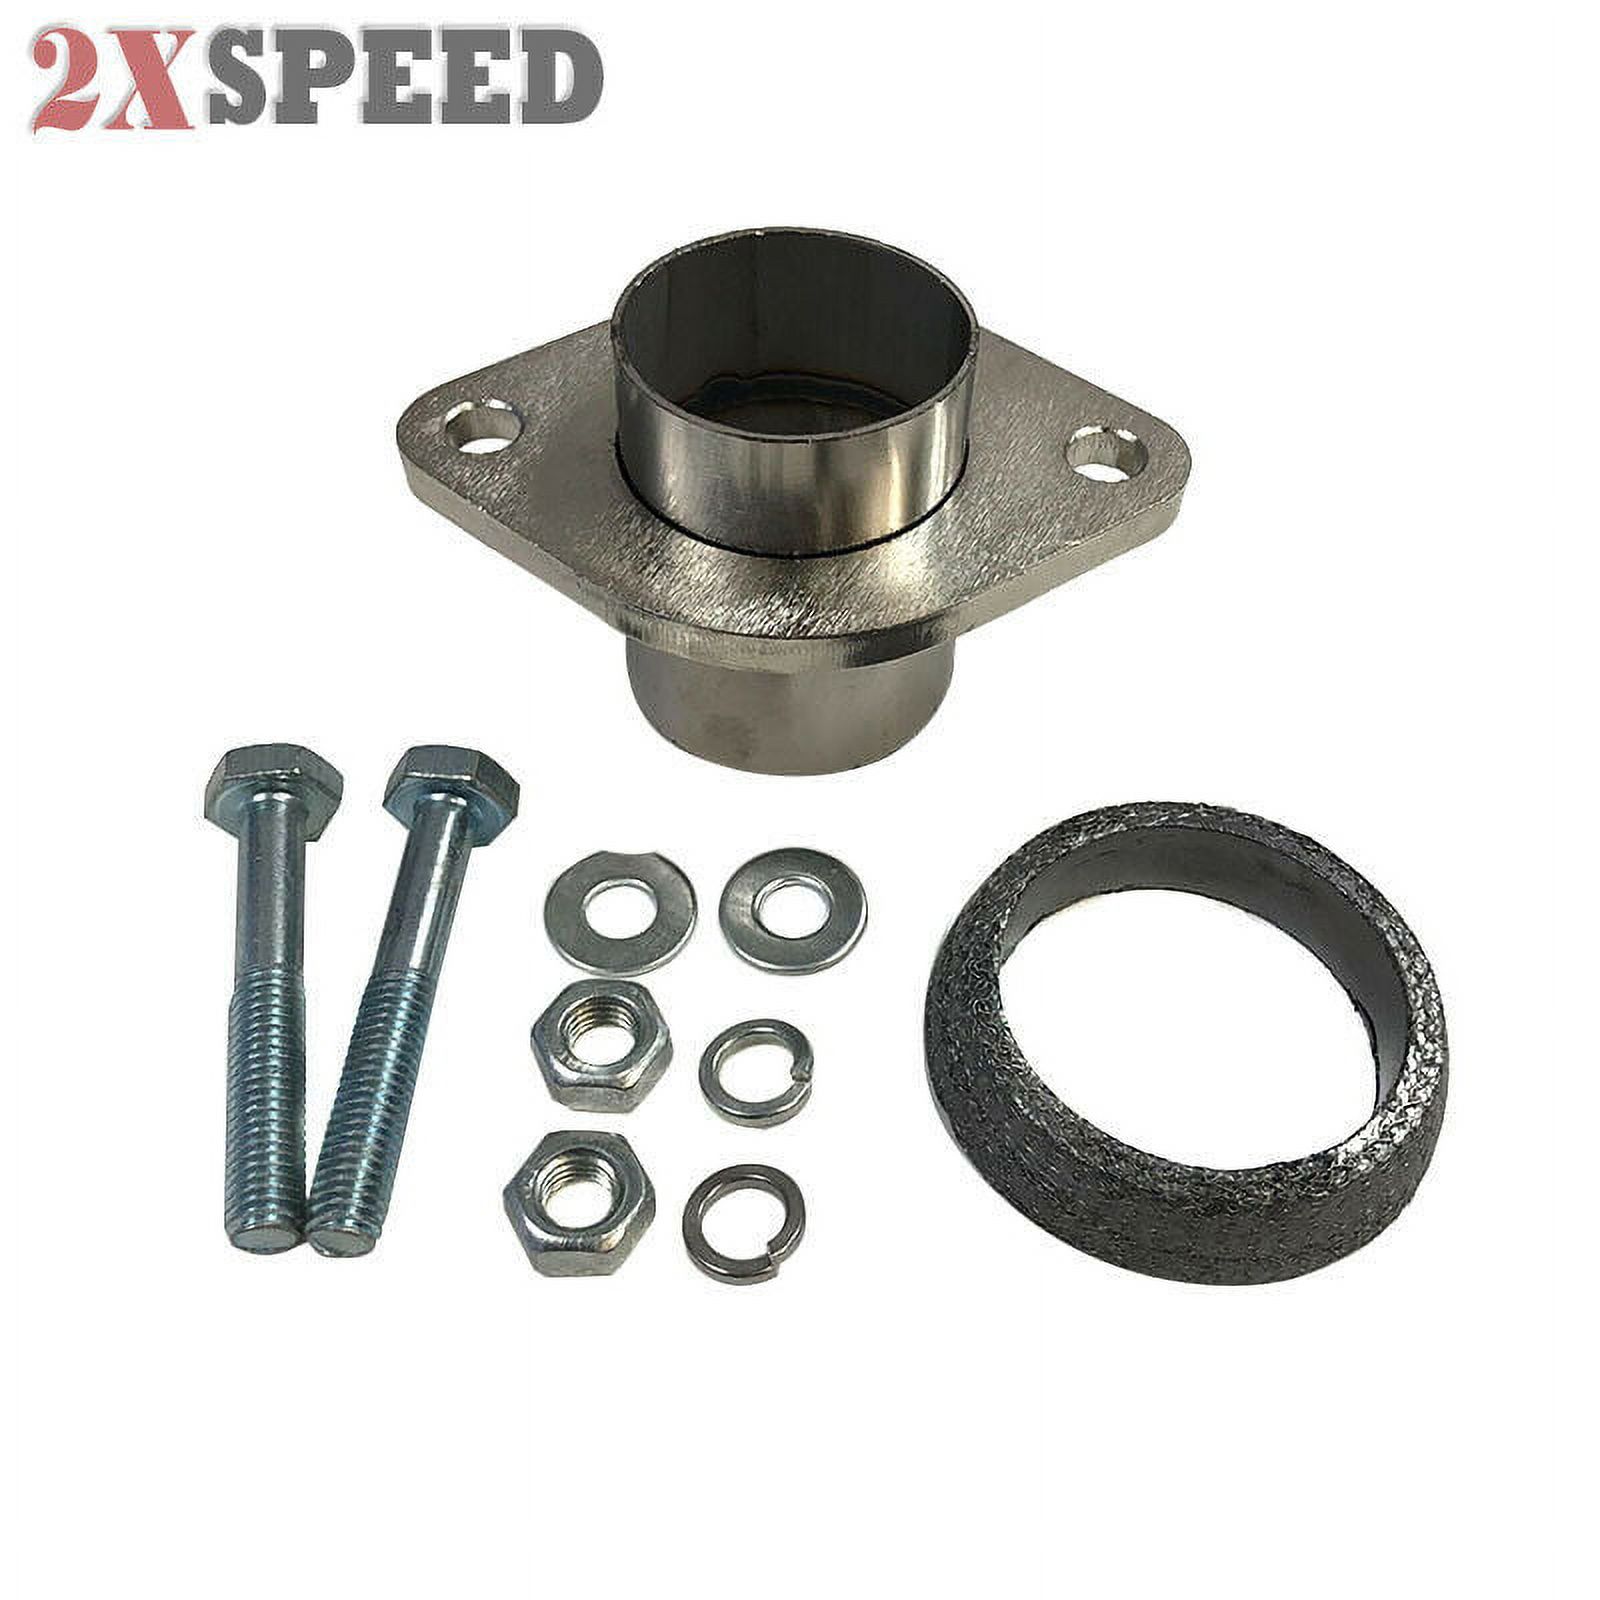 Brand New 2" Semi-Direct Fit Exhaust Converter Pipe Flange Repair Kit w/ Gasket Brand New 2" Semi-Direct Fit Exhaust Converter Pipe Flange Repair Kit w/ Gasket - image 1 of 7